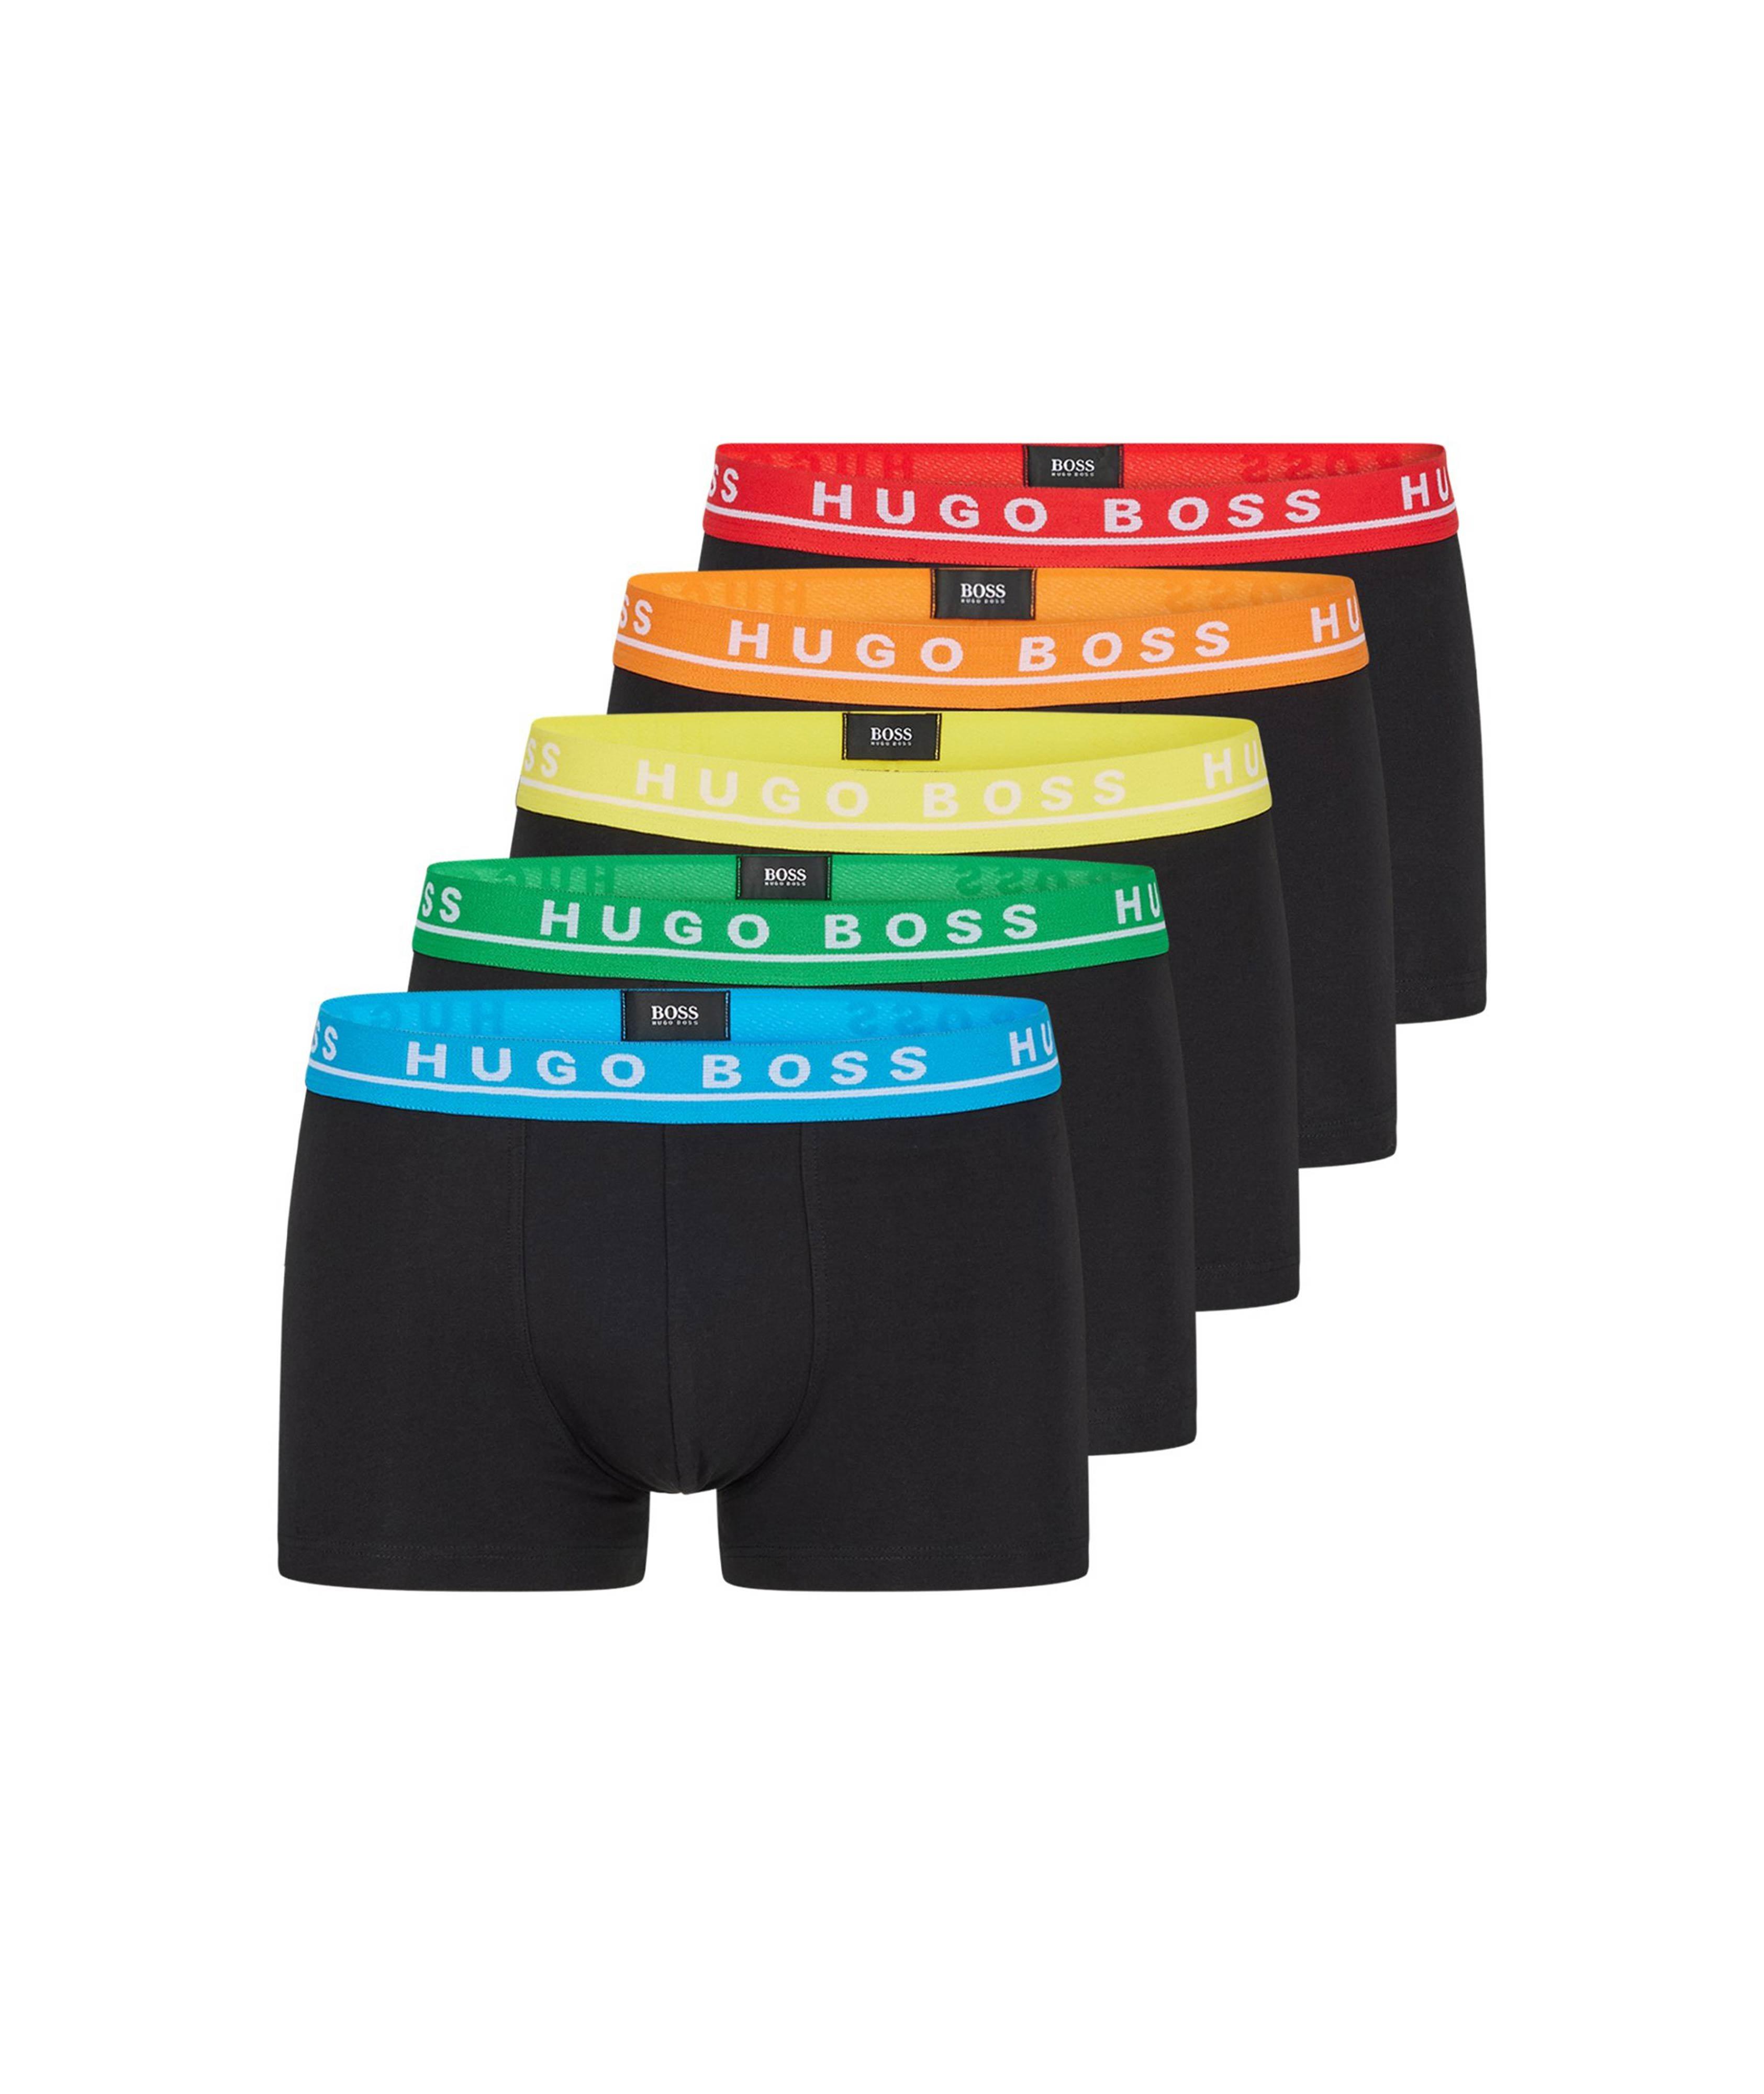 BOSS Pride Collection Stretch-Cotton 5-Pack Trunks image 0